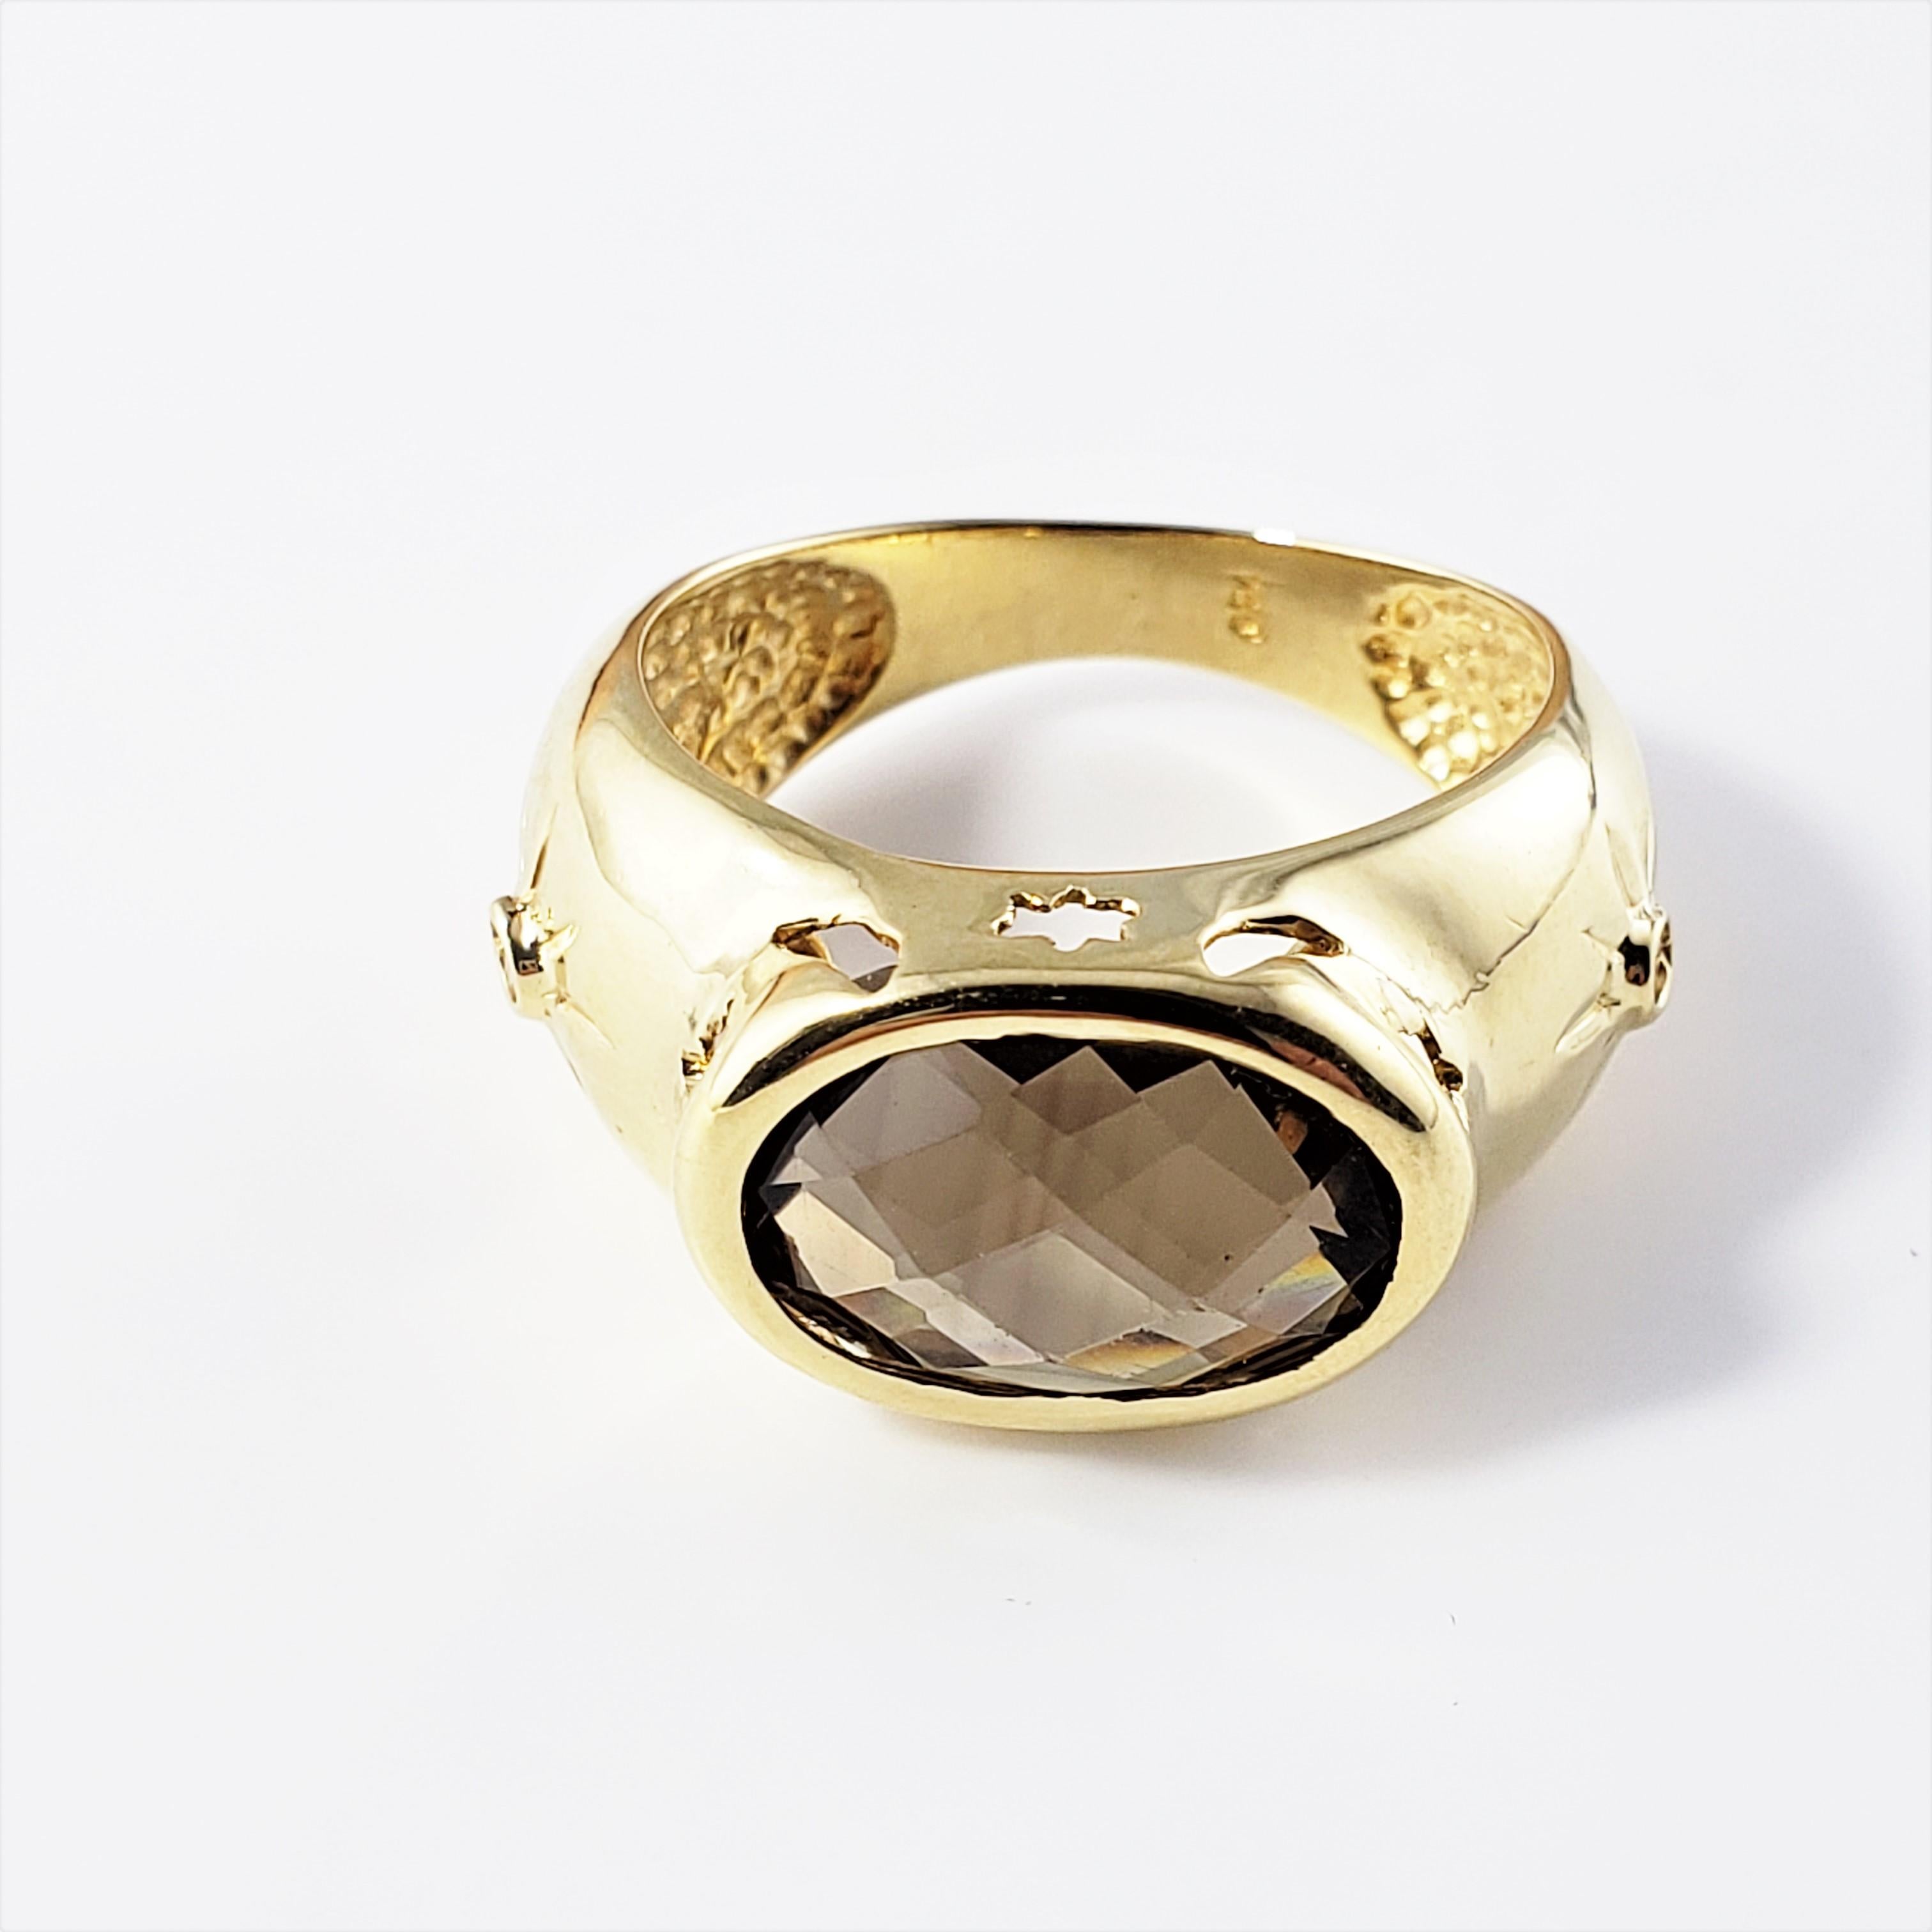 18 Karat Yellow Gold Smokey Quartz and Diamond Ring Size 7-

This stunning ring features one oval simulated smokey quartz (13 mm x 9 mm) and two round single cut diamonds set in classic 14K yellow gold.  Width:  11 mm.  Shank:  4 mm.

Approximate